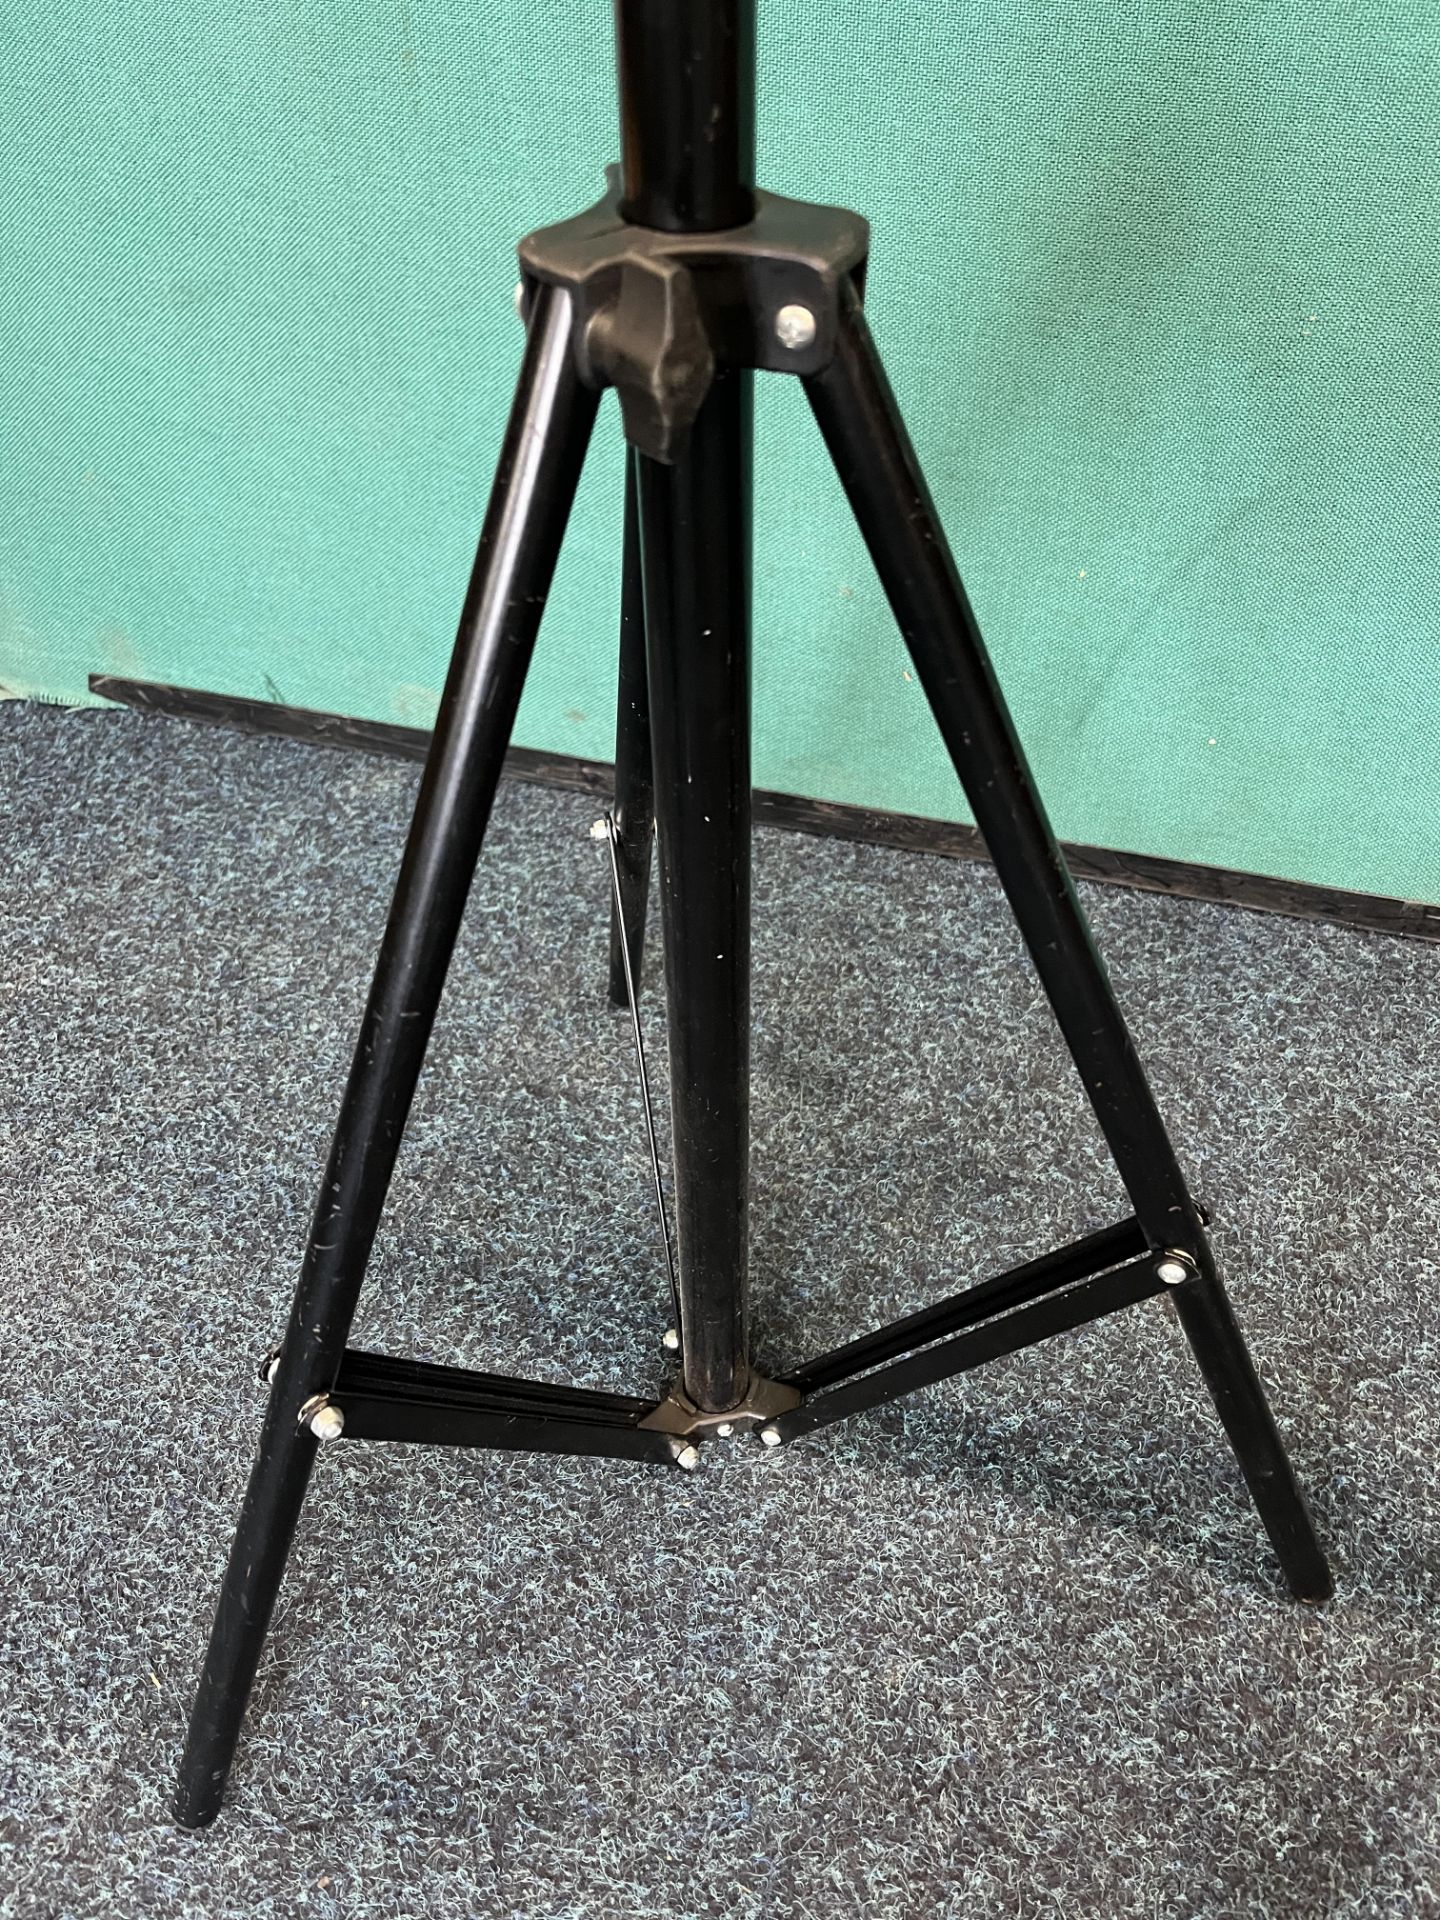 2 x Camera Tripods - As pictured - Image 6 of 6